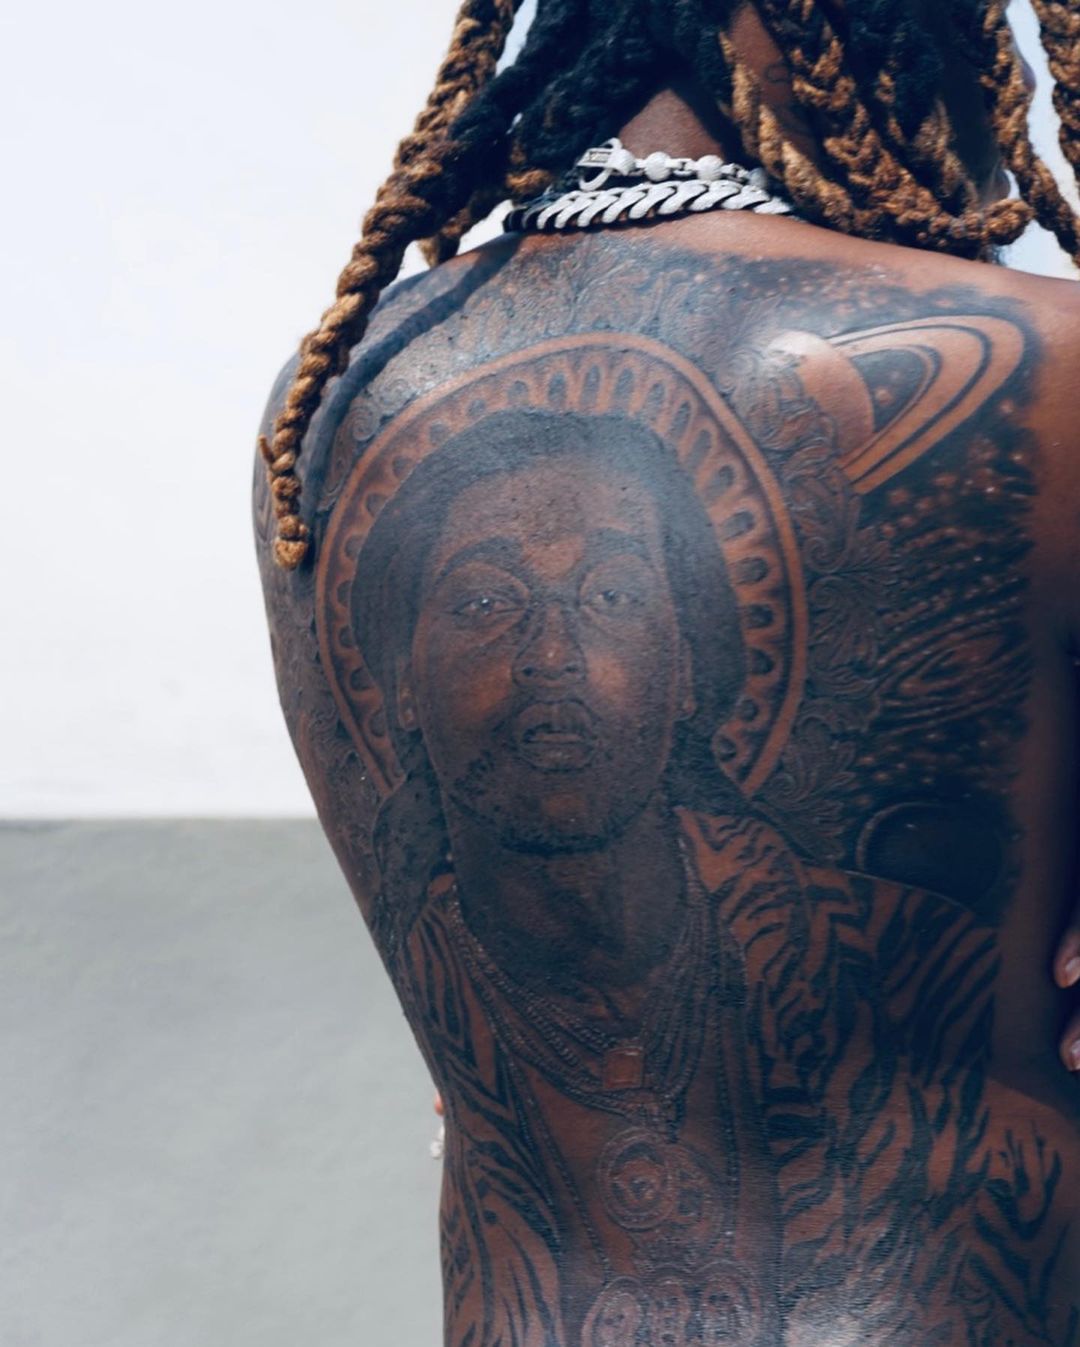 Offsets gets giant tattoo of his Late cousin, Takeoff on his back (Photos)